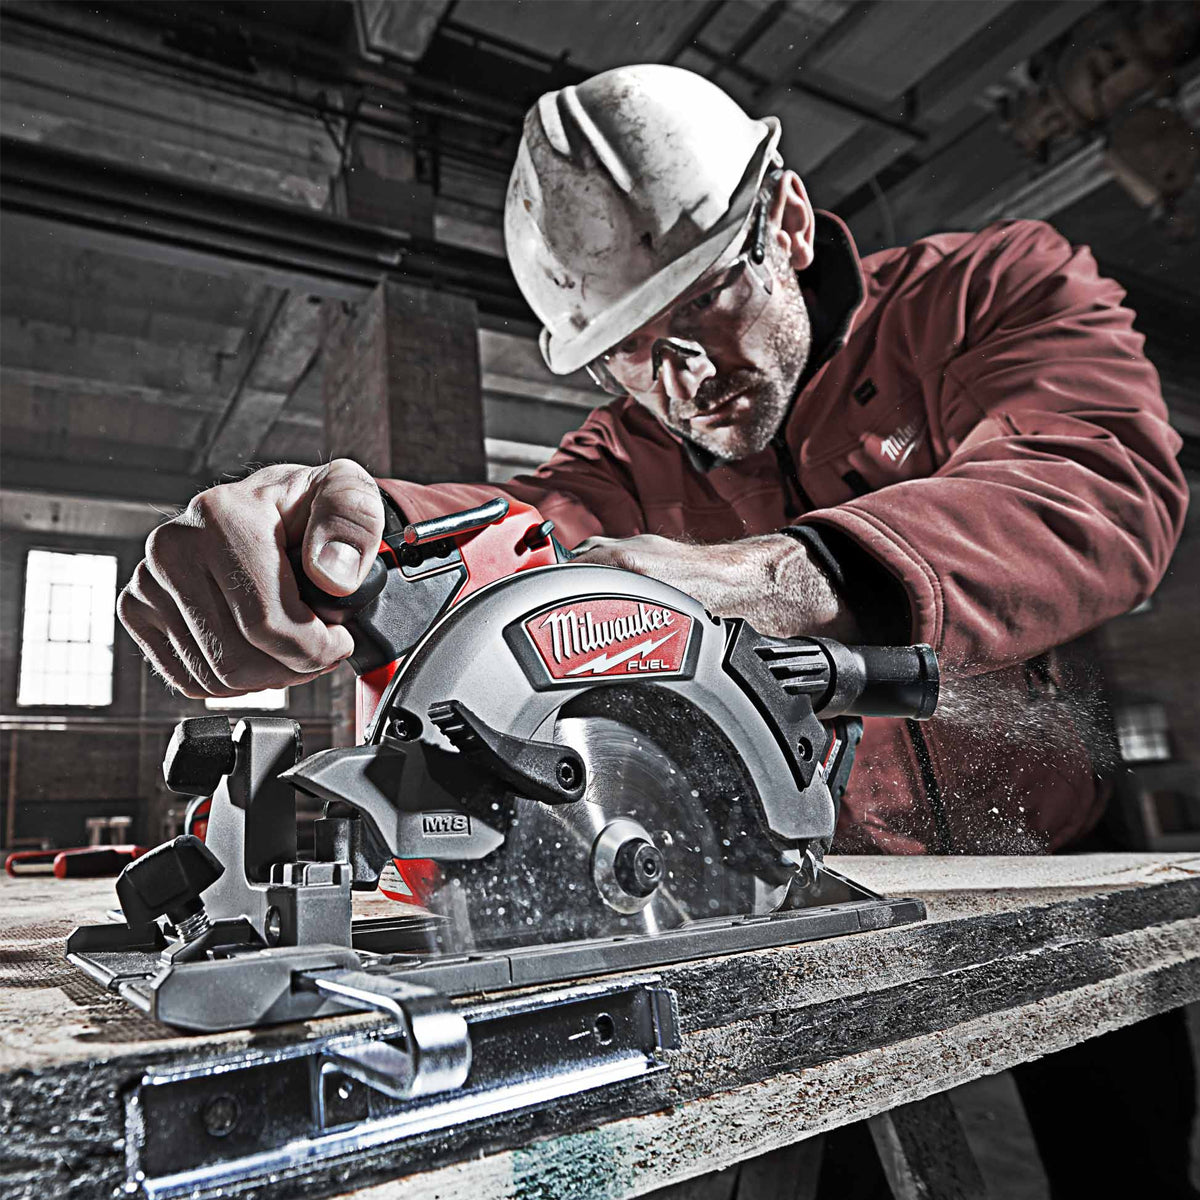 Milwaukee M18CCS55-0 18V Brushless 165mm Circular Saw with 1 x 5.0Ah Battery & Fast Charger